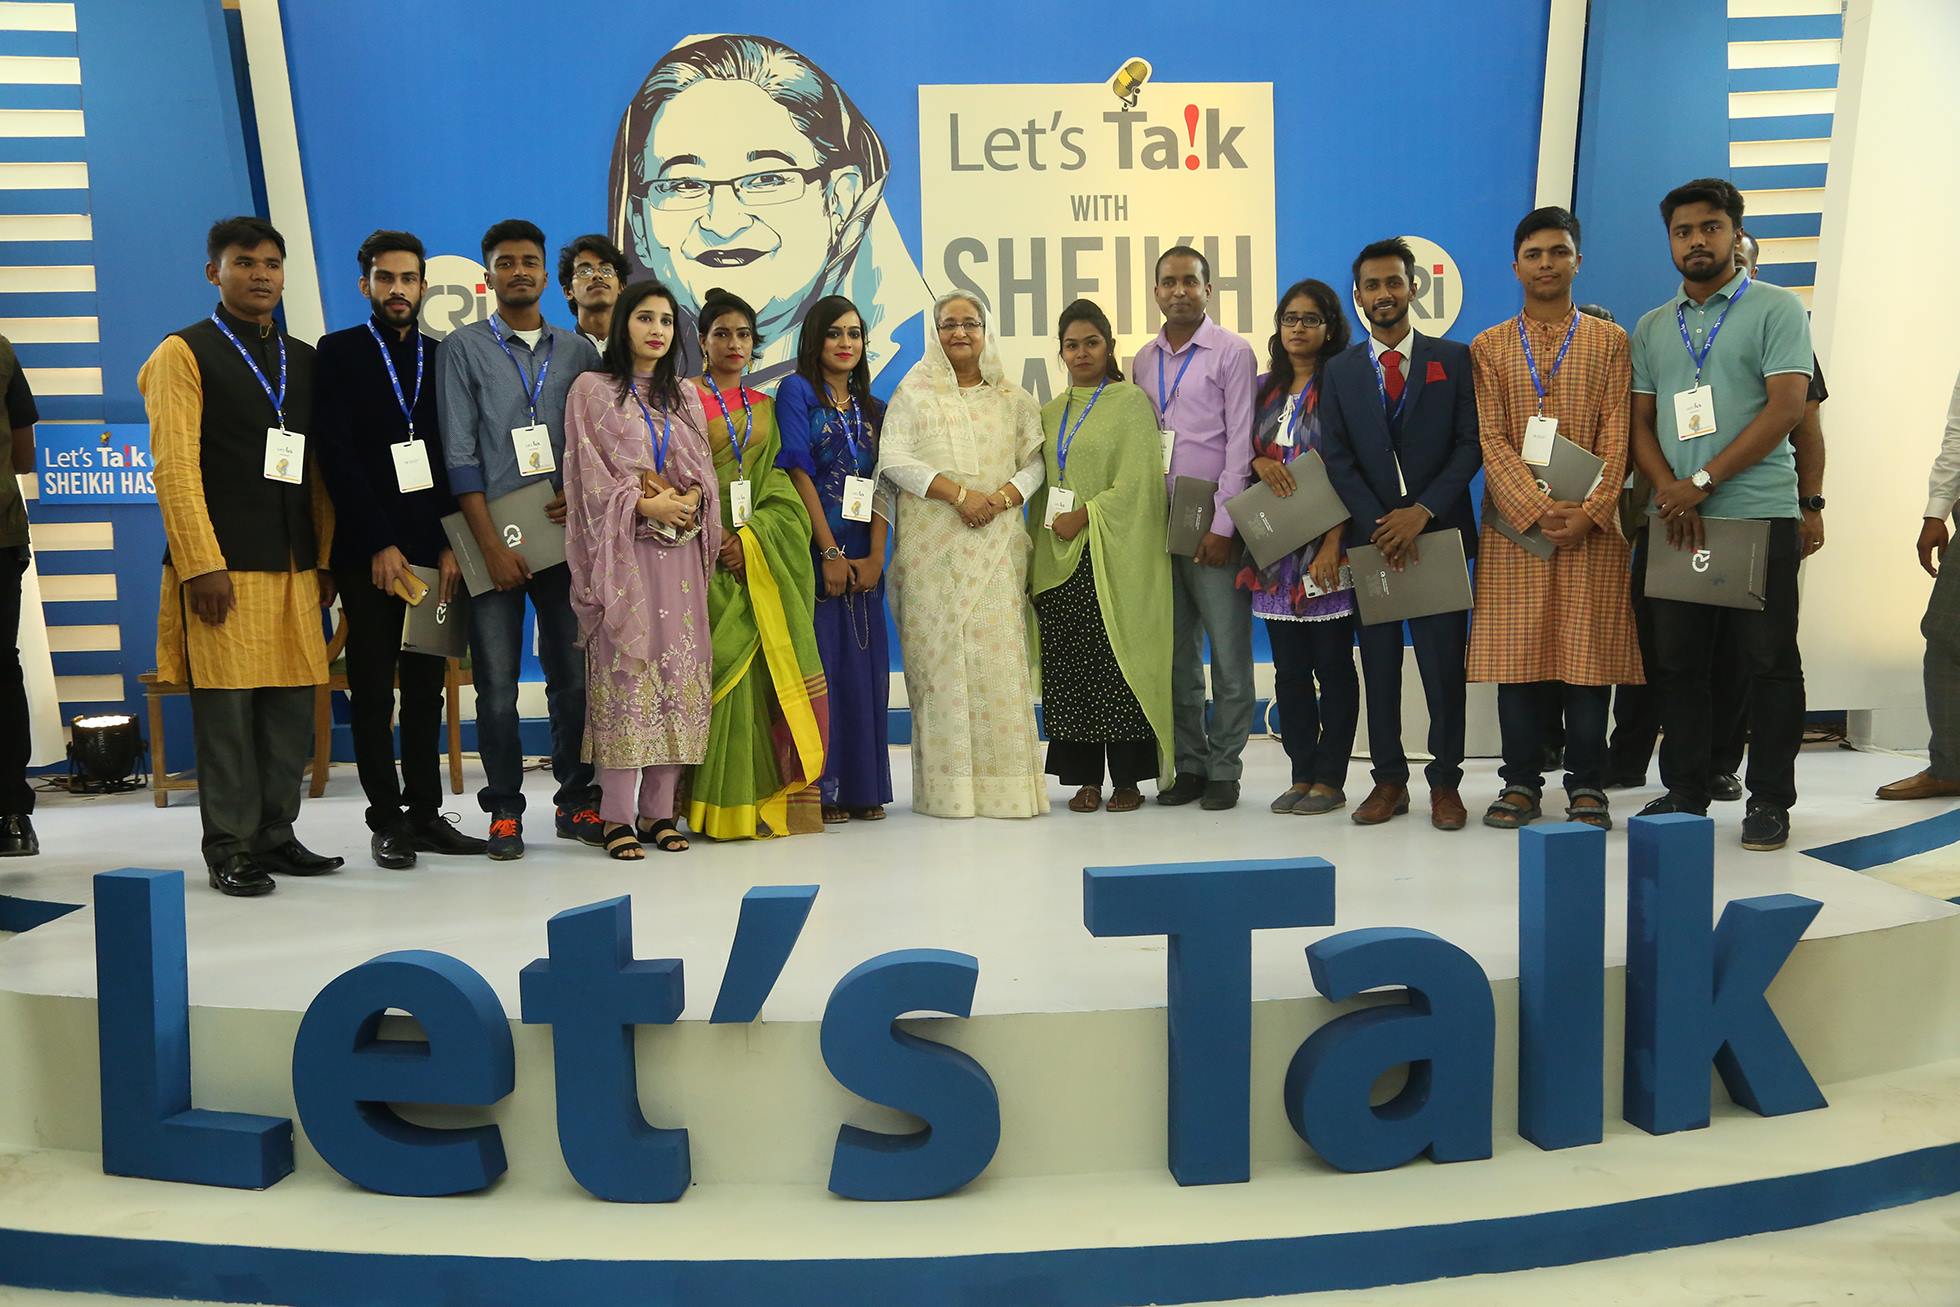 Let’s Talk with Sheikh Hasina